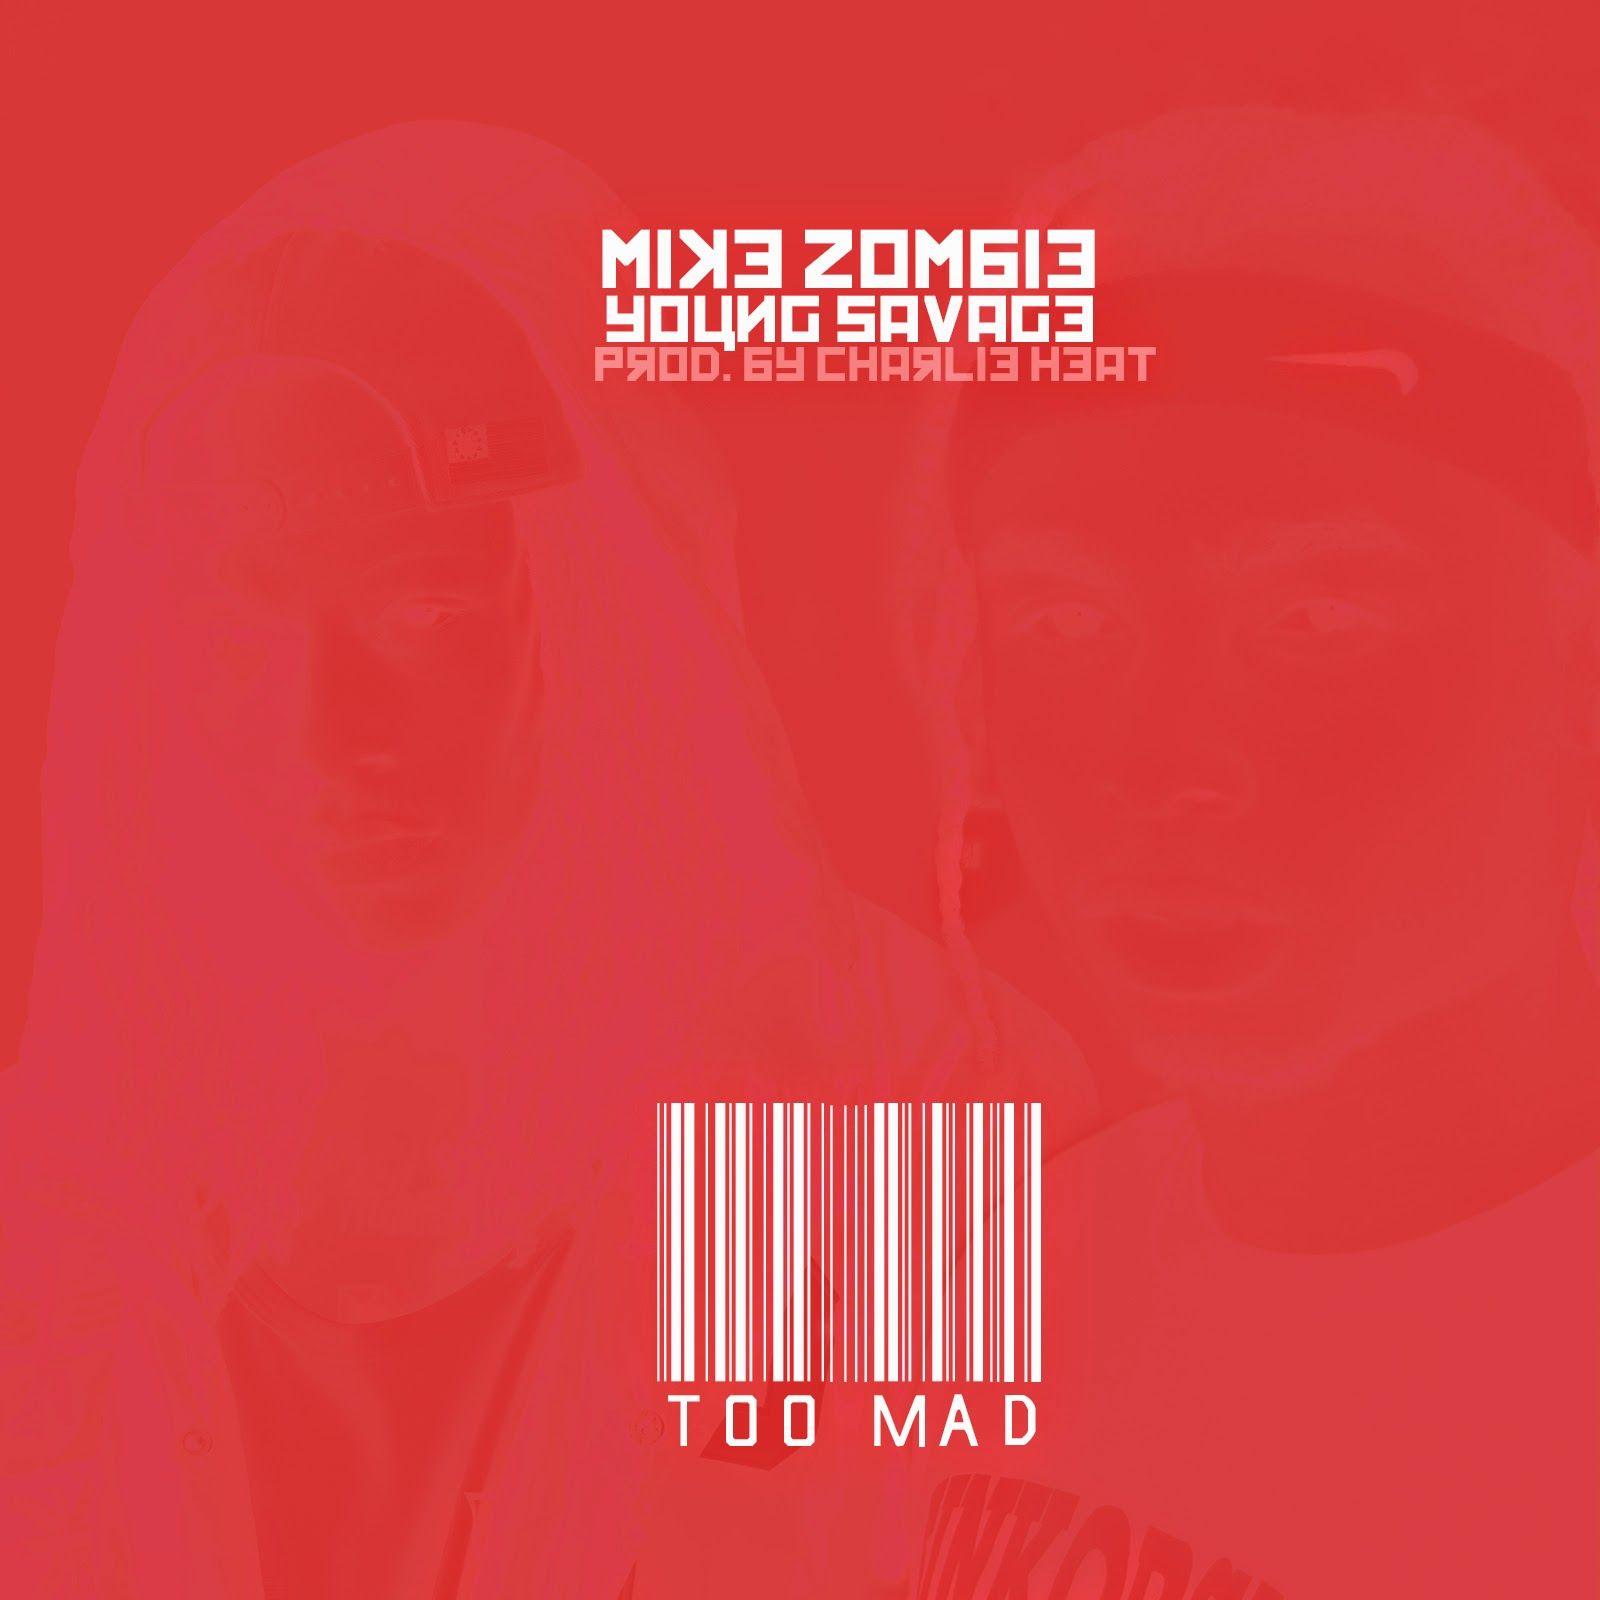 Savage Heat Logo - Mike Zombie - 2 Mad Feat. Young Savage (Prod. by Charlie Heat)